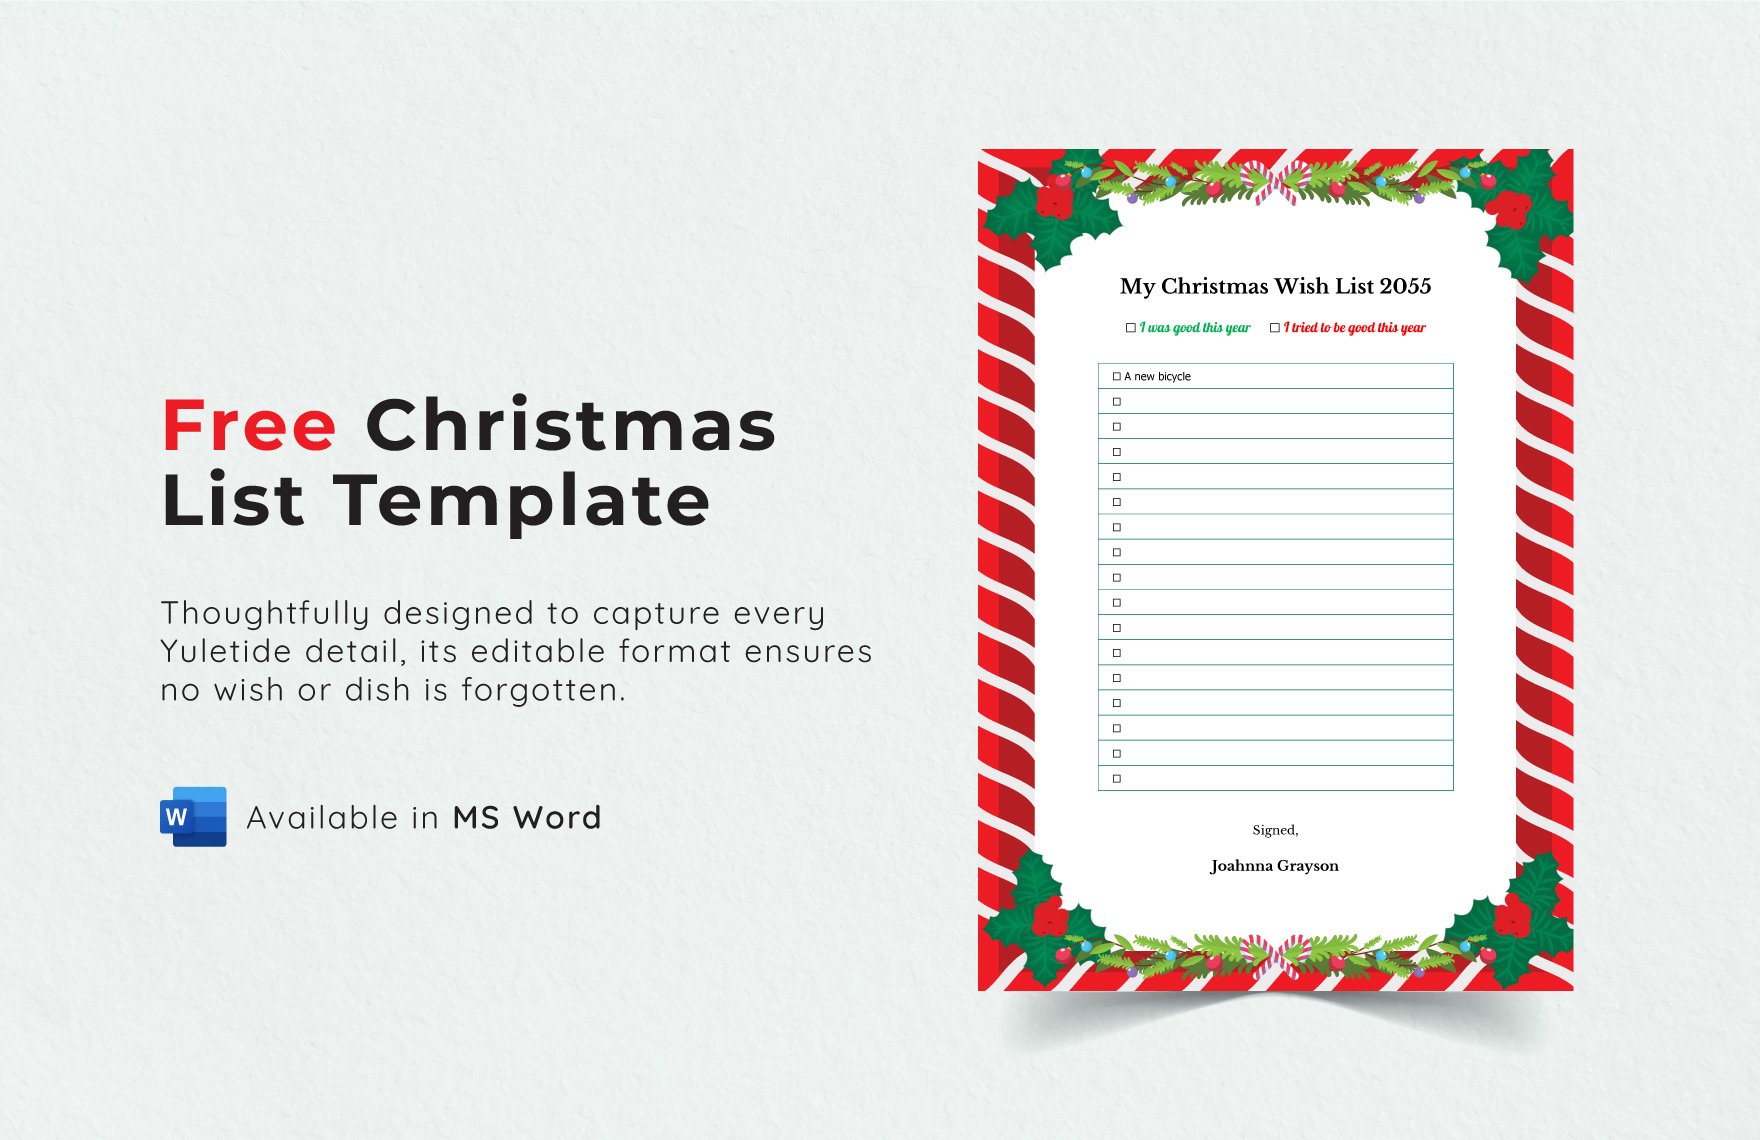 Free Christmas Wish List Template Download in Word, Google Docs, PDF